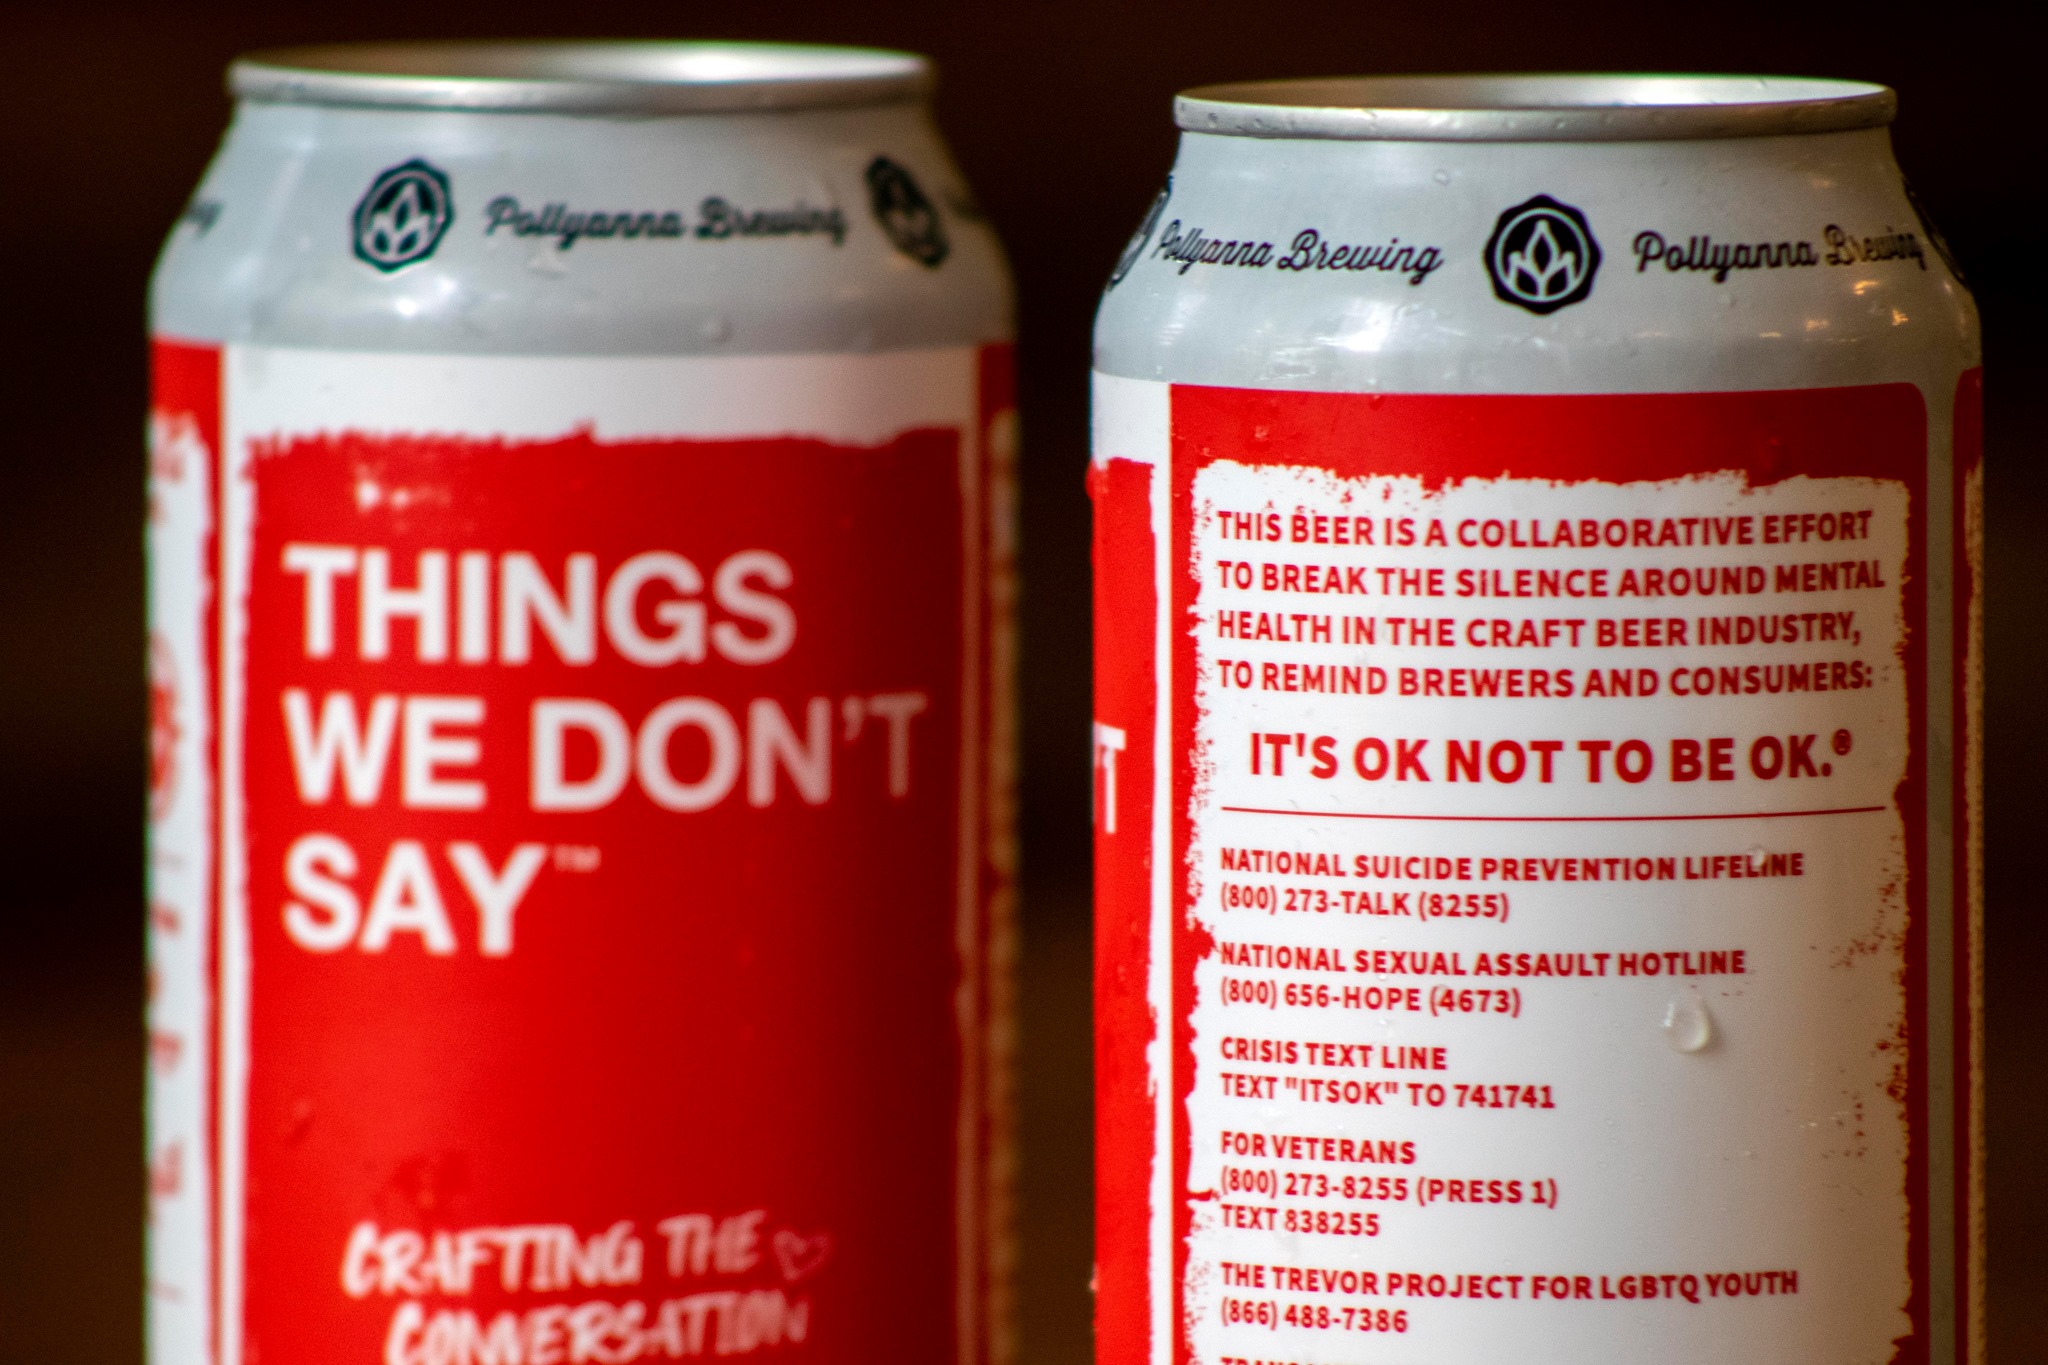 Can's of Pollyanna Brewing Co's Things We Don't Say